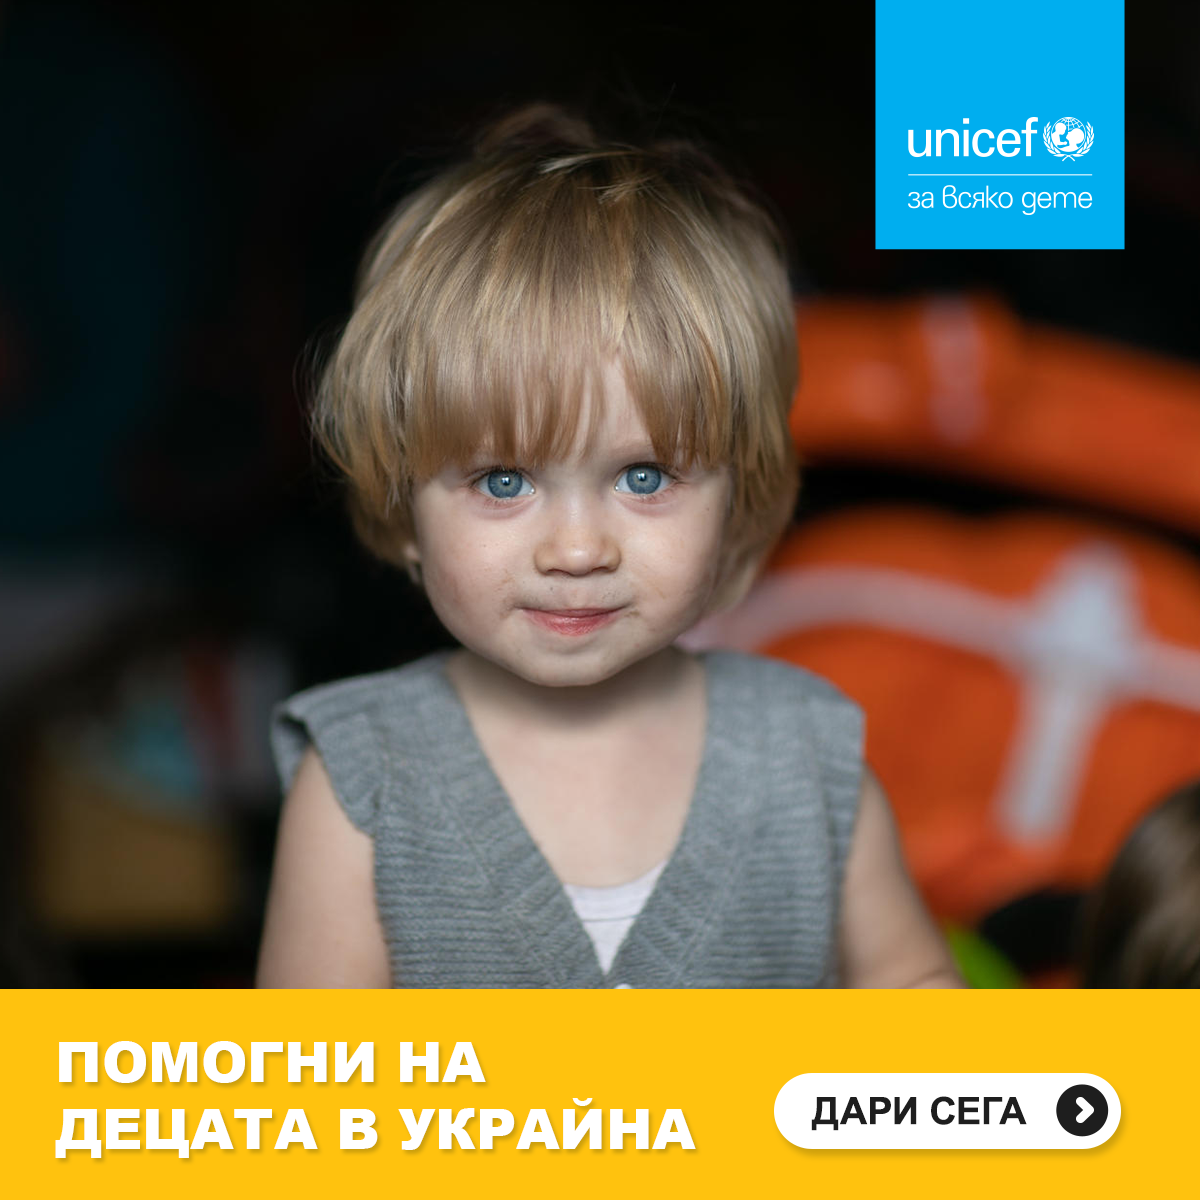 UNICEF in Bulgaria launches extraordinary fund campaign to provide emergency humanitarian aid to children and families in Ukraine